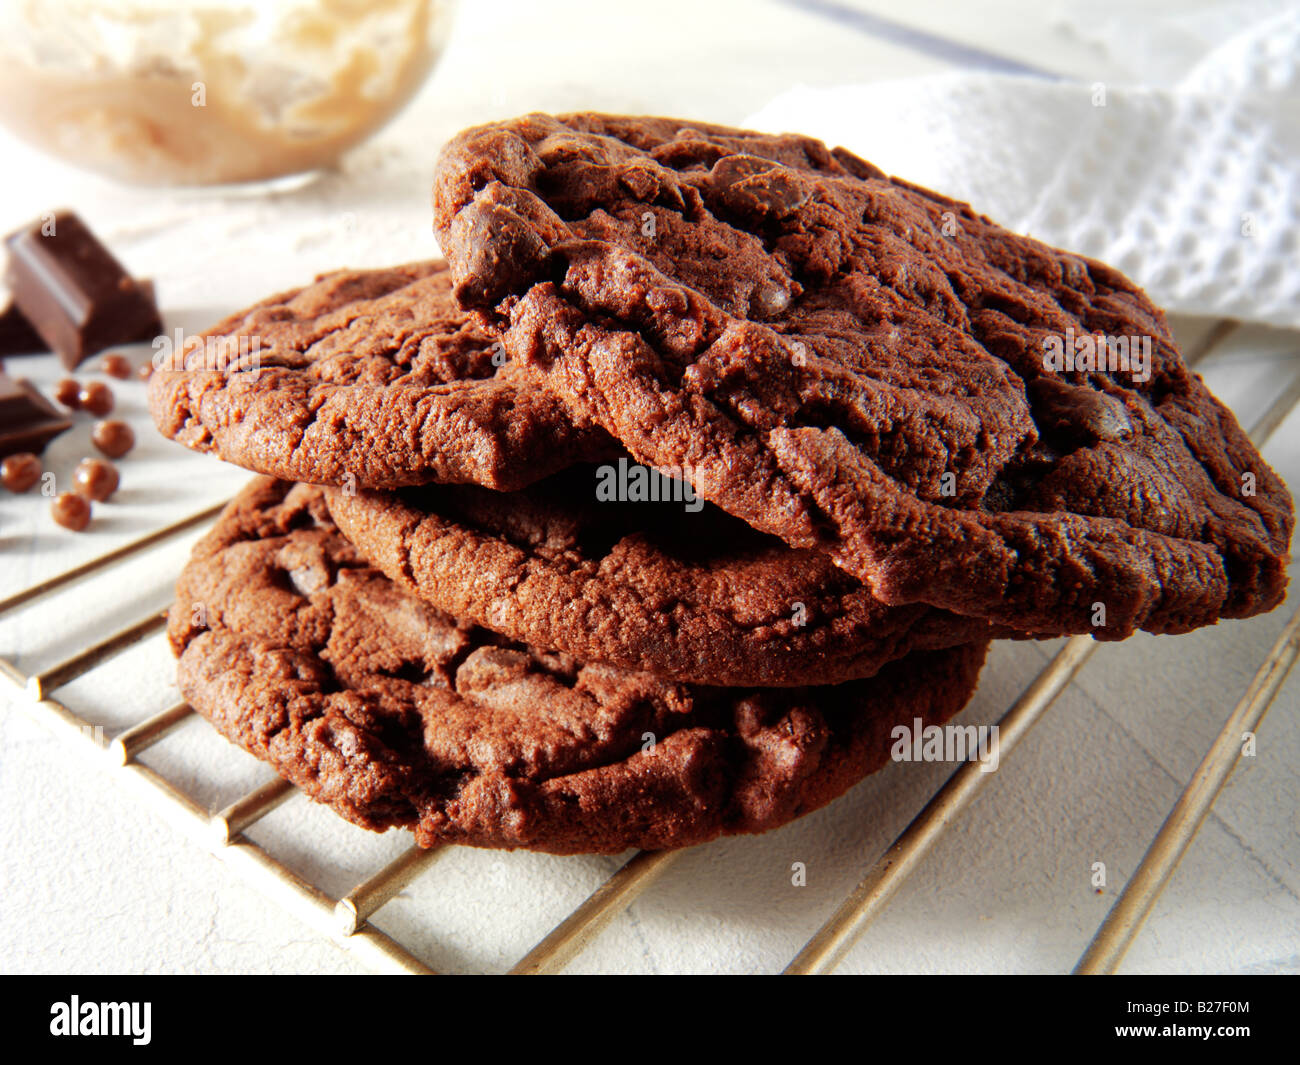 Chocolate brownie biscuits Stock Photo